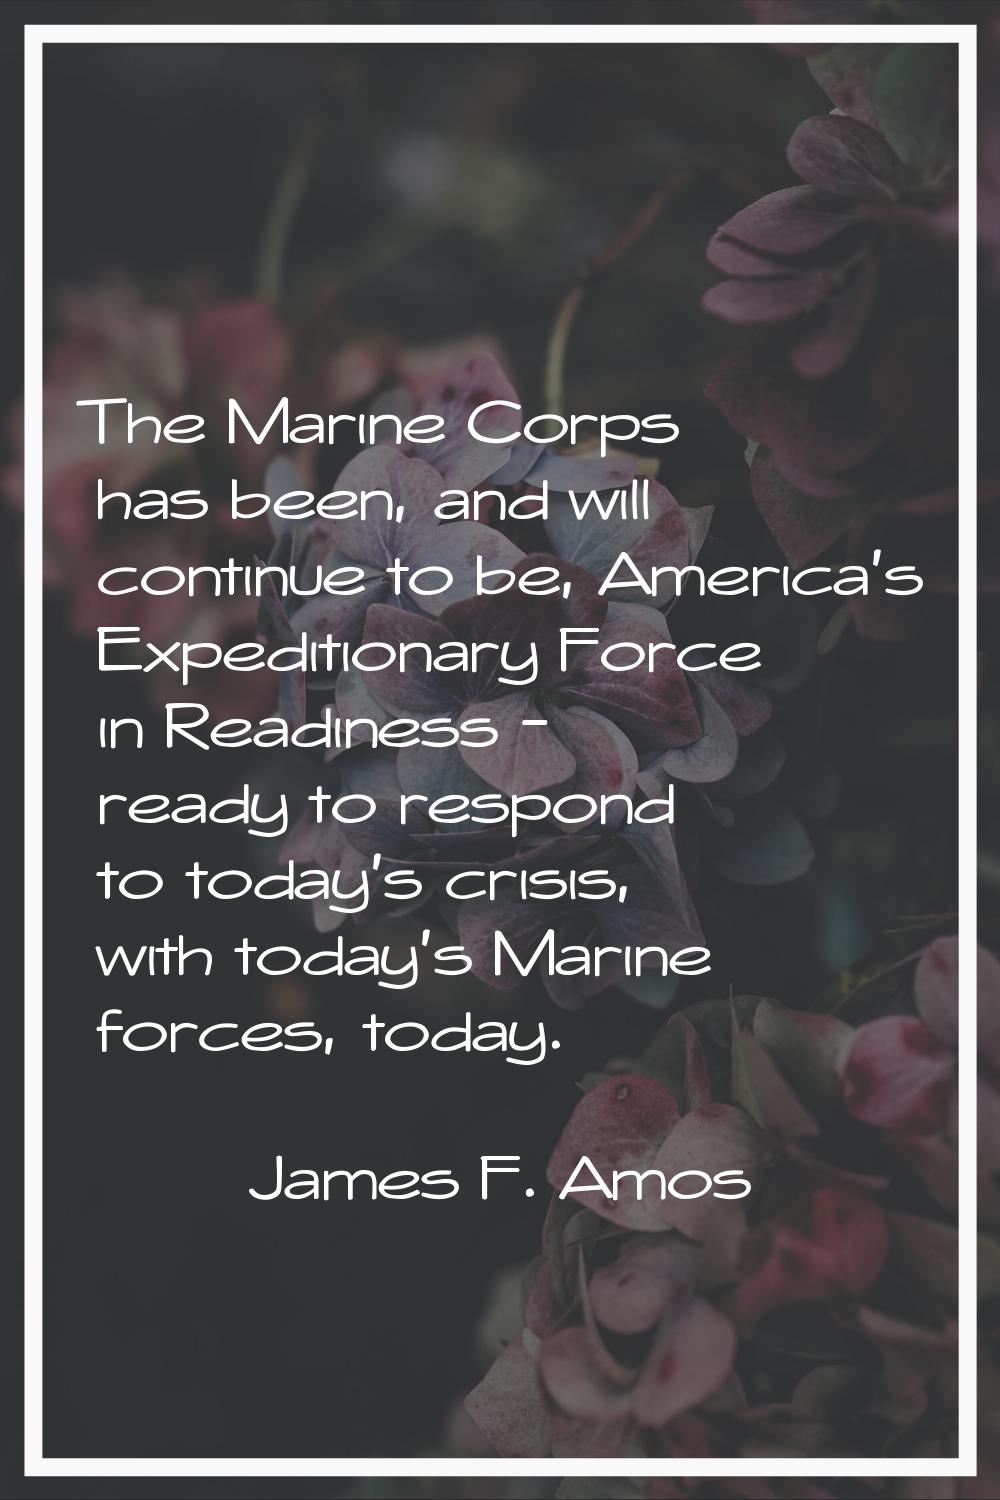 The Marine Corps has been, and will continue to be, America's Expeditionary Force in Readiness - re